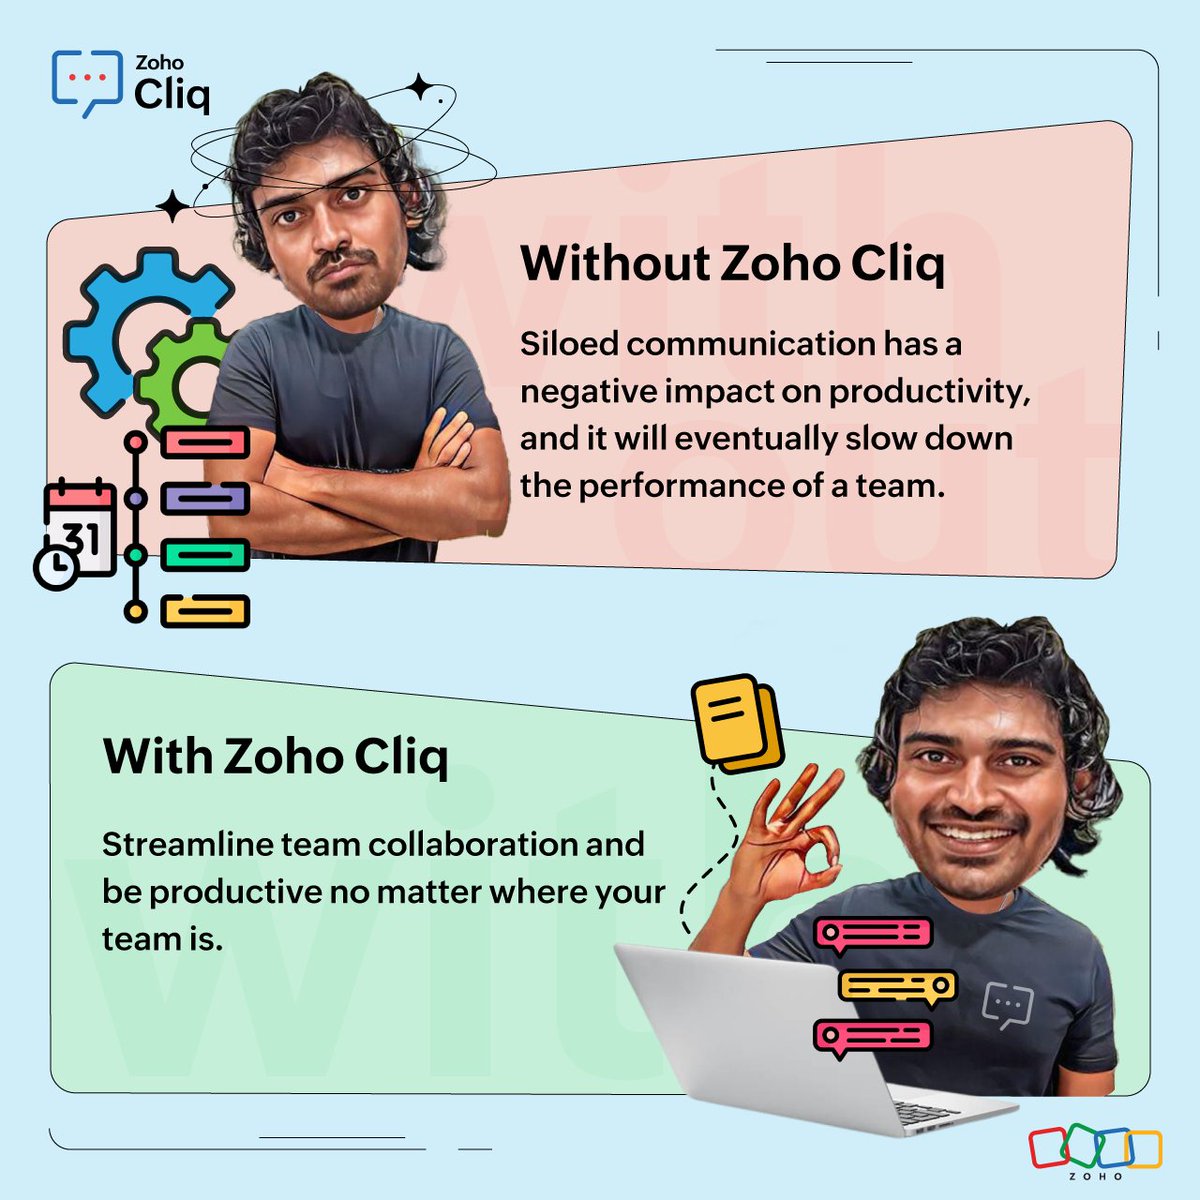 Make team #collaboration easy with Zoho Cliq. Enjoy real-time conversations and instant file sharing, enabling your team to stay connected and productive regardless of location. 𝐈𝐭'𝐬 𝐚𝐥𝐥 𝐮𝐧𝐢𝐟𝐢𝐞𝐝!
#ucaas #unifiedcommunications #teamcollaboration #Productivity